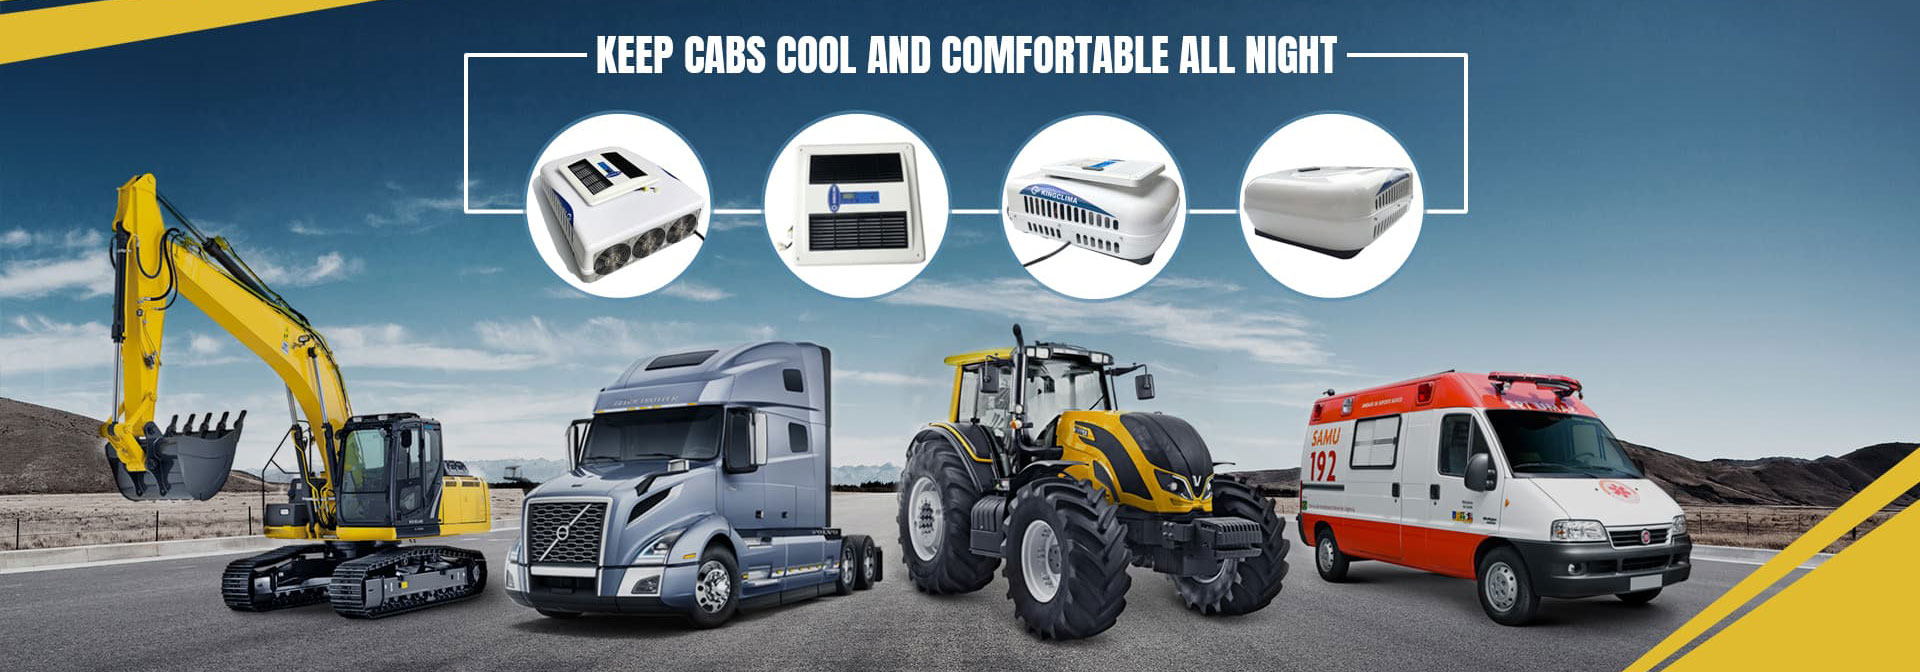 kingclima commercial trucks cooling air conditioners